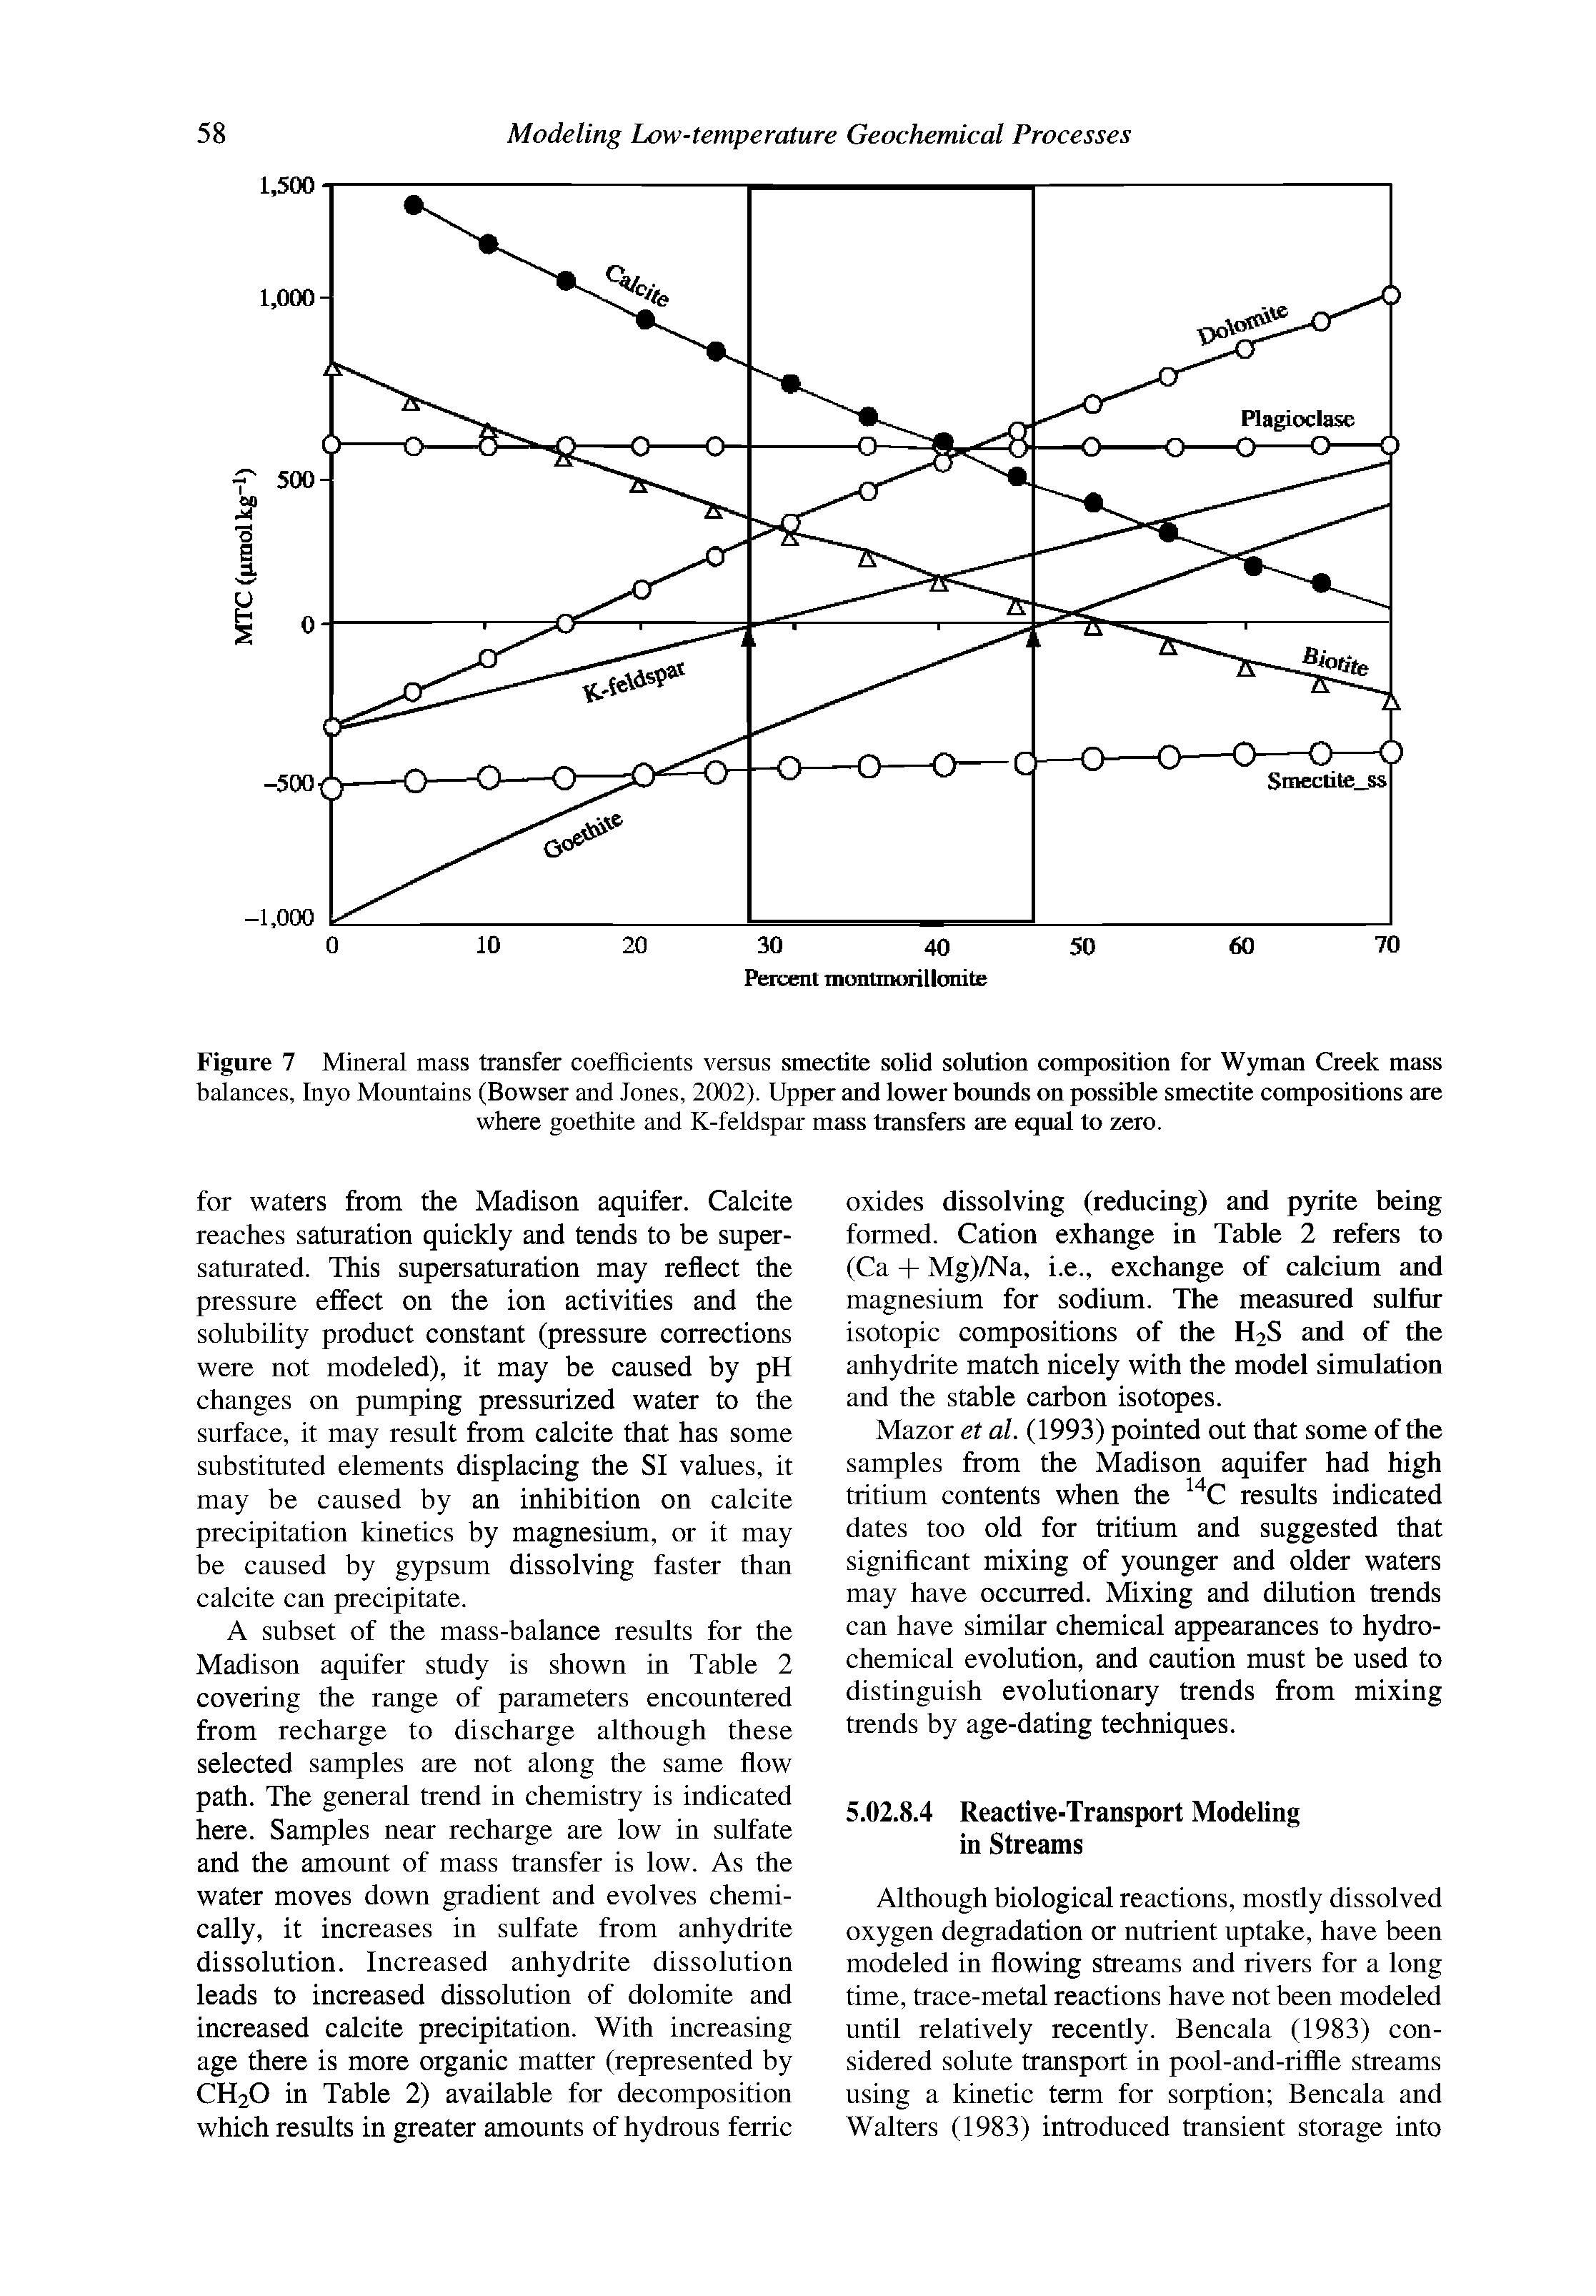 Figure 7 Mineral mass transfer coefficients versus smectite solid solution composition for Wyman Creek mass balances, Inyo Mountains (Bowser and Jones, 2002). Upper and lower bounds on possible smectite compositions are where goethite and K-feldspar mass transfers are equal to zero.